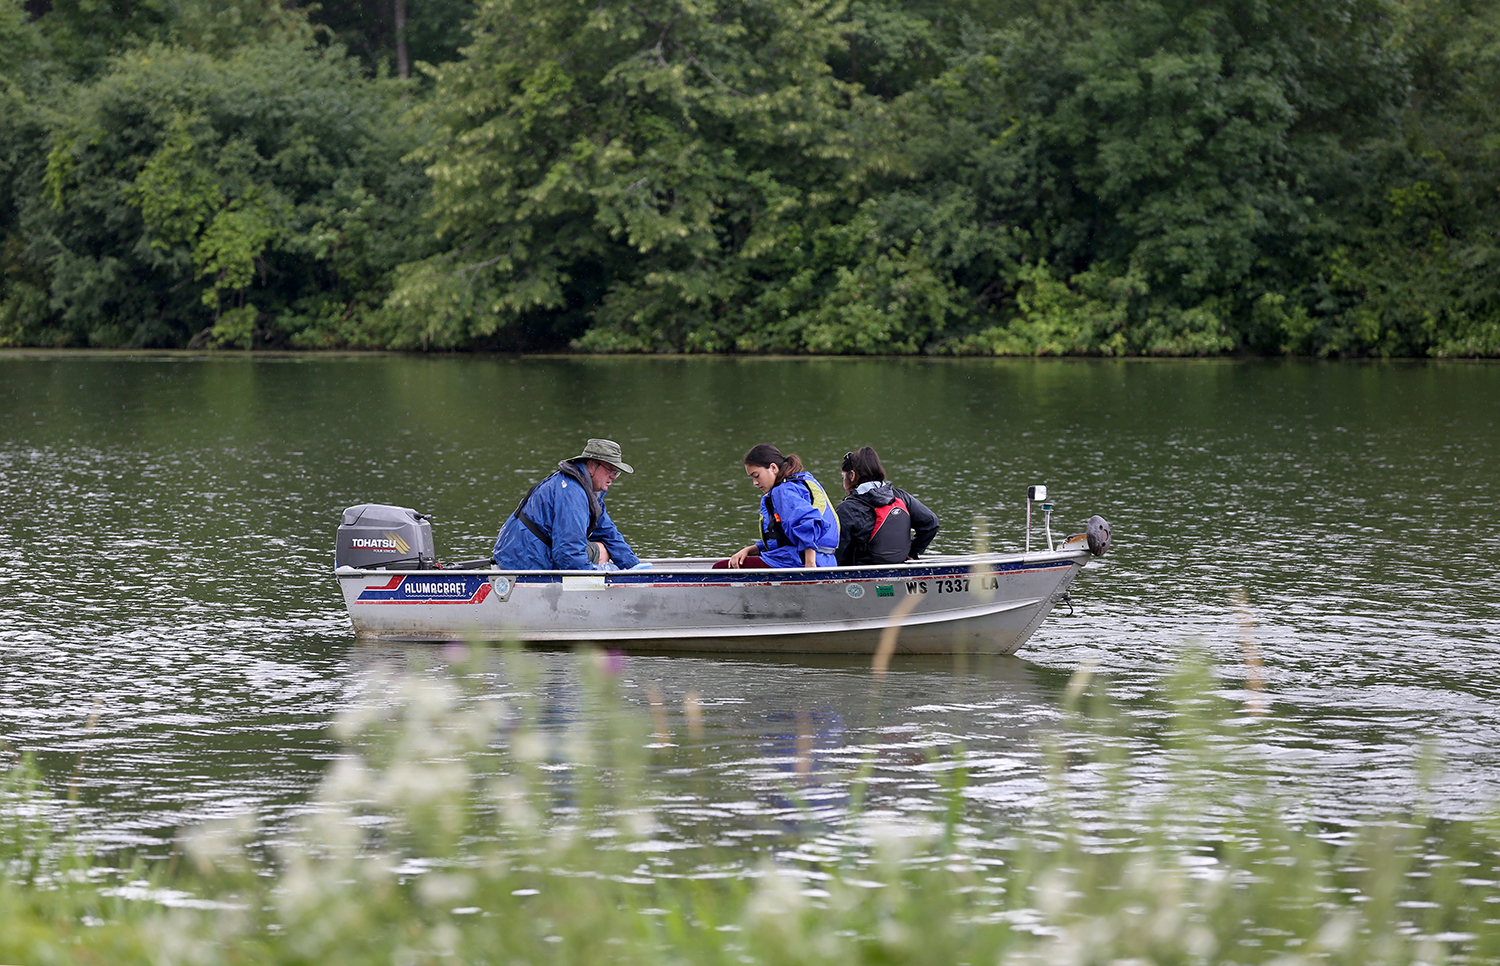 LAKES REU students collect water samples and check monitoring stations on Lake Menomin Tuesday, July 18, 2017. Thirteen university students from around the U.S. are part of LAKES REU, an 8-week summer research experience for undergraduates that studies issues related to blue-green algae in the Red Cedar River watershed and how the compromised water quality affects quality of life in the region. (UW-Stout Photo by Brett T. Roseman)